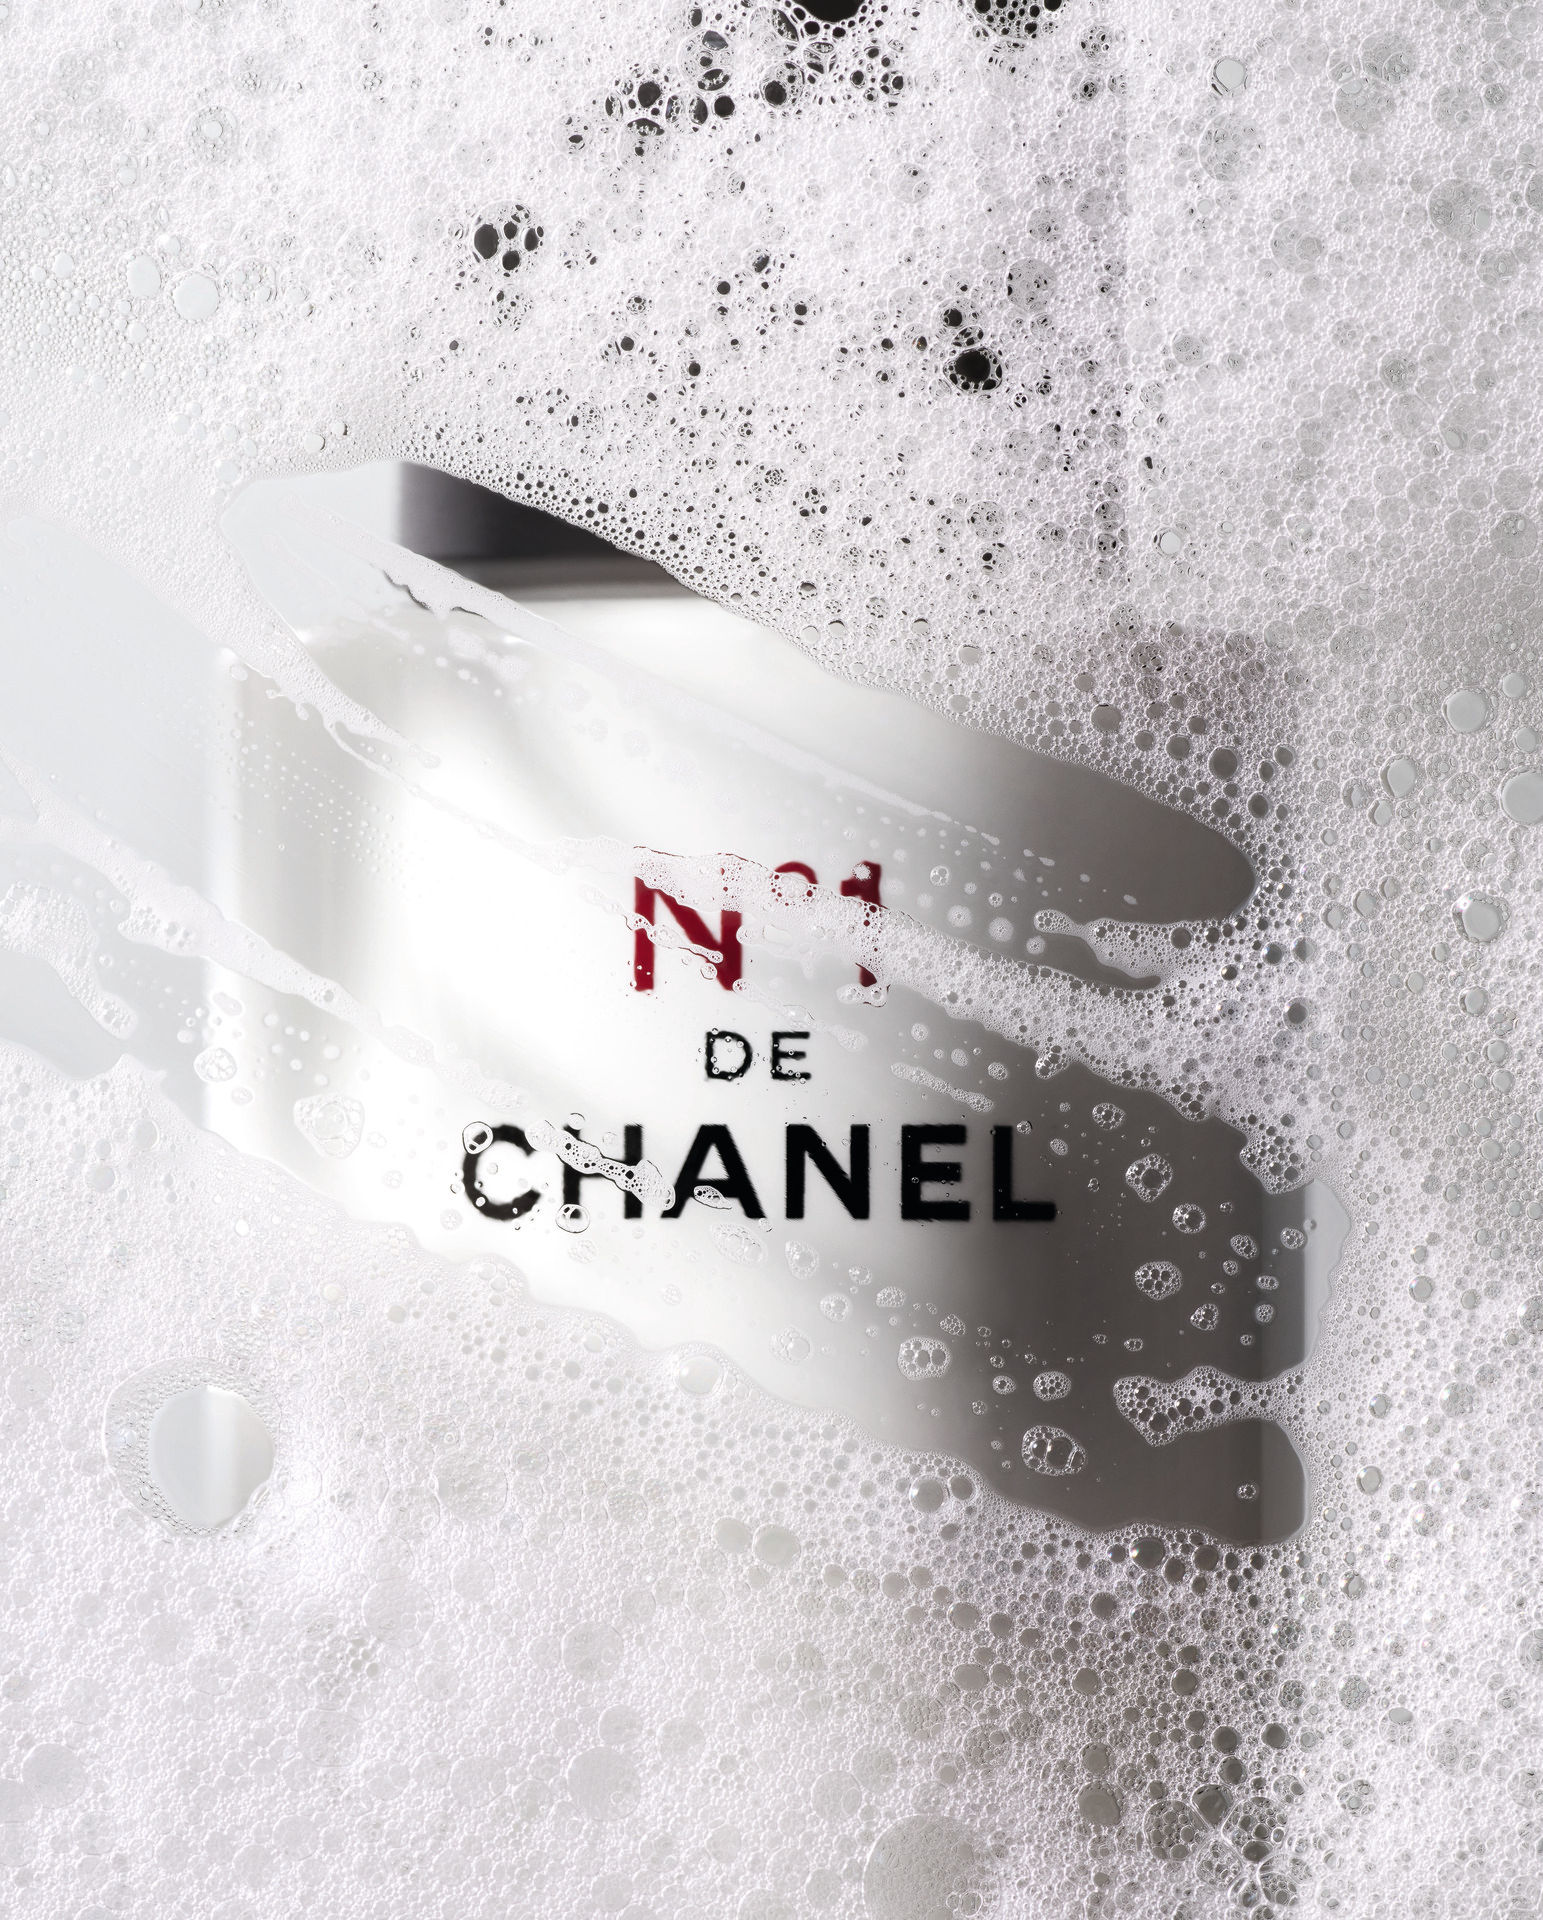 N°1 de Chanel is Their First Completely Sustainable Beauty Line